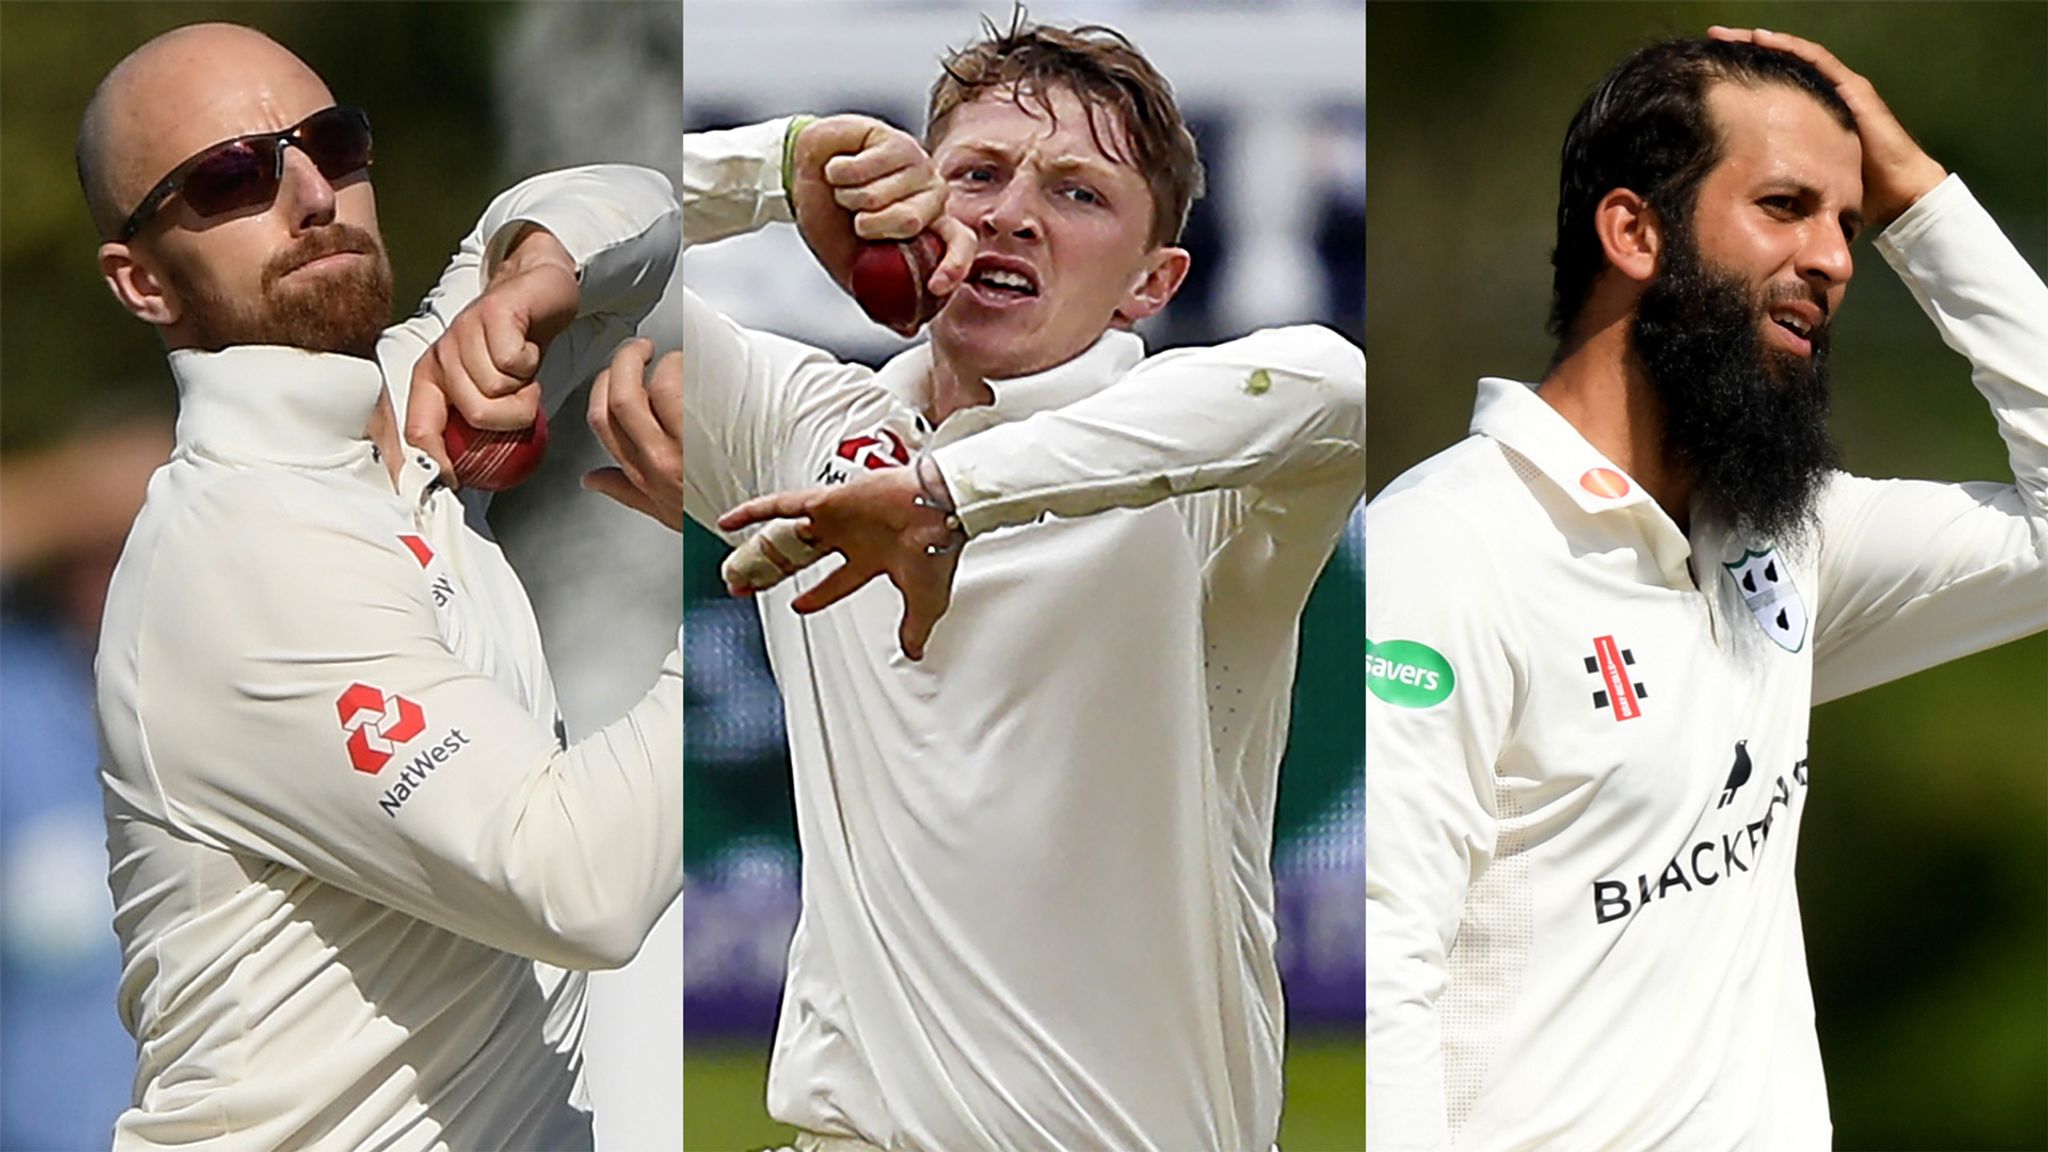 England spinners for India Tests- Leach, Bess and Ali